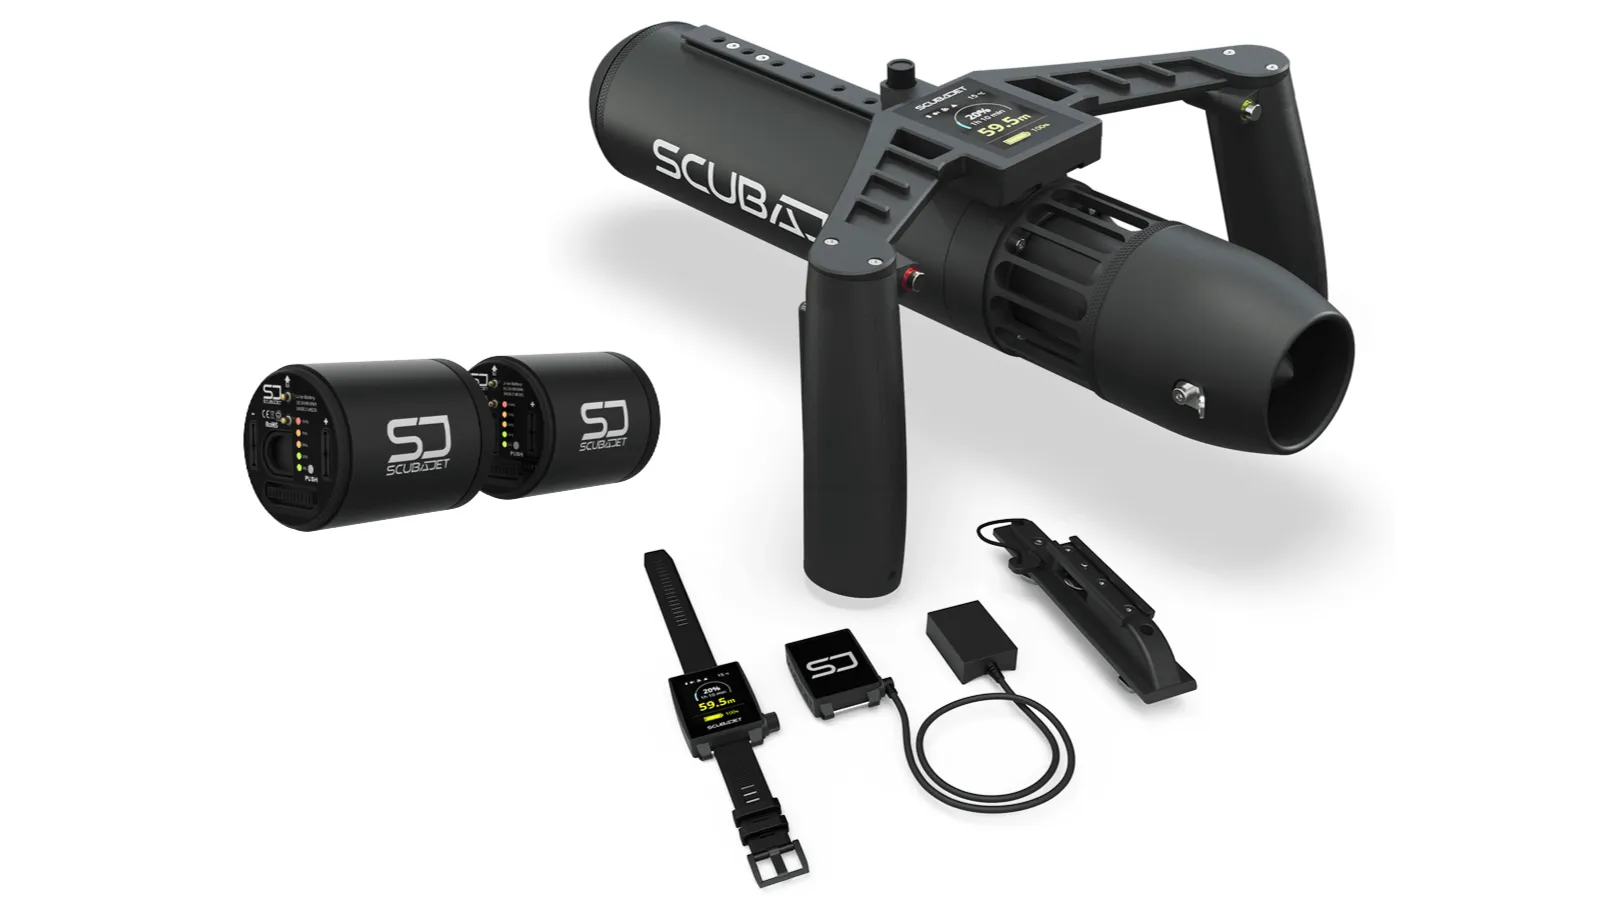 Scubajet PRO All-In-One Dive and SUP Kit